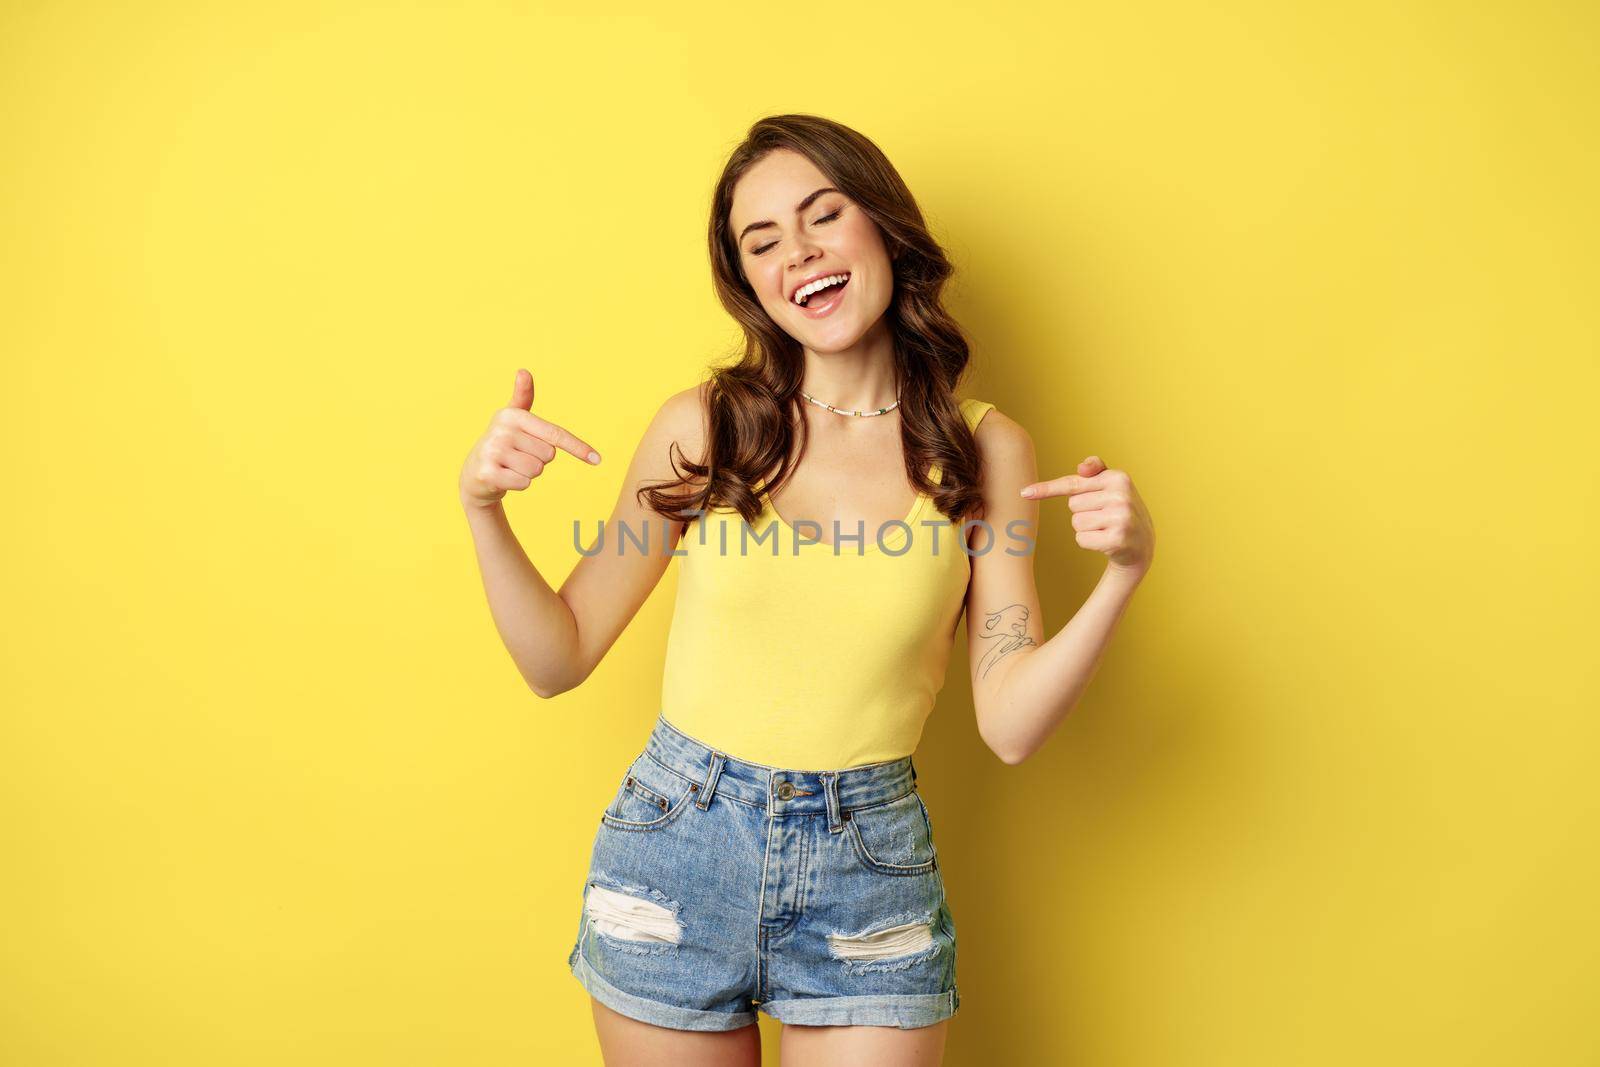 Happy attractive woman pointing fingers at herself, self-promoting, something personal, smiling and looking proud or confident, standing over yellow background.